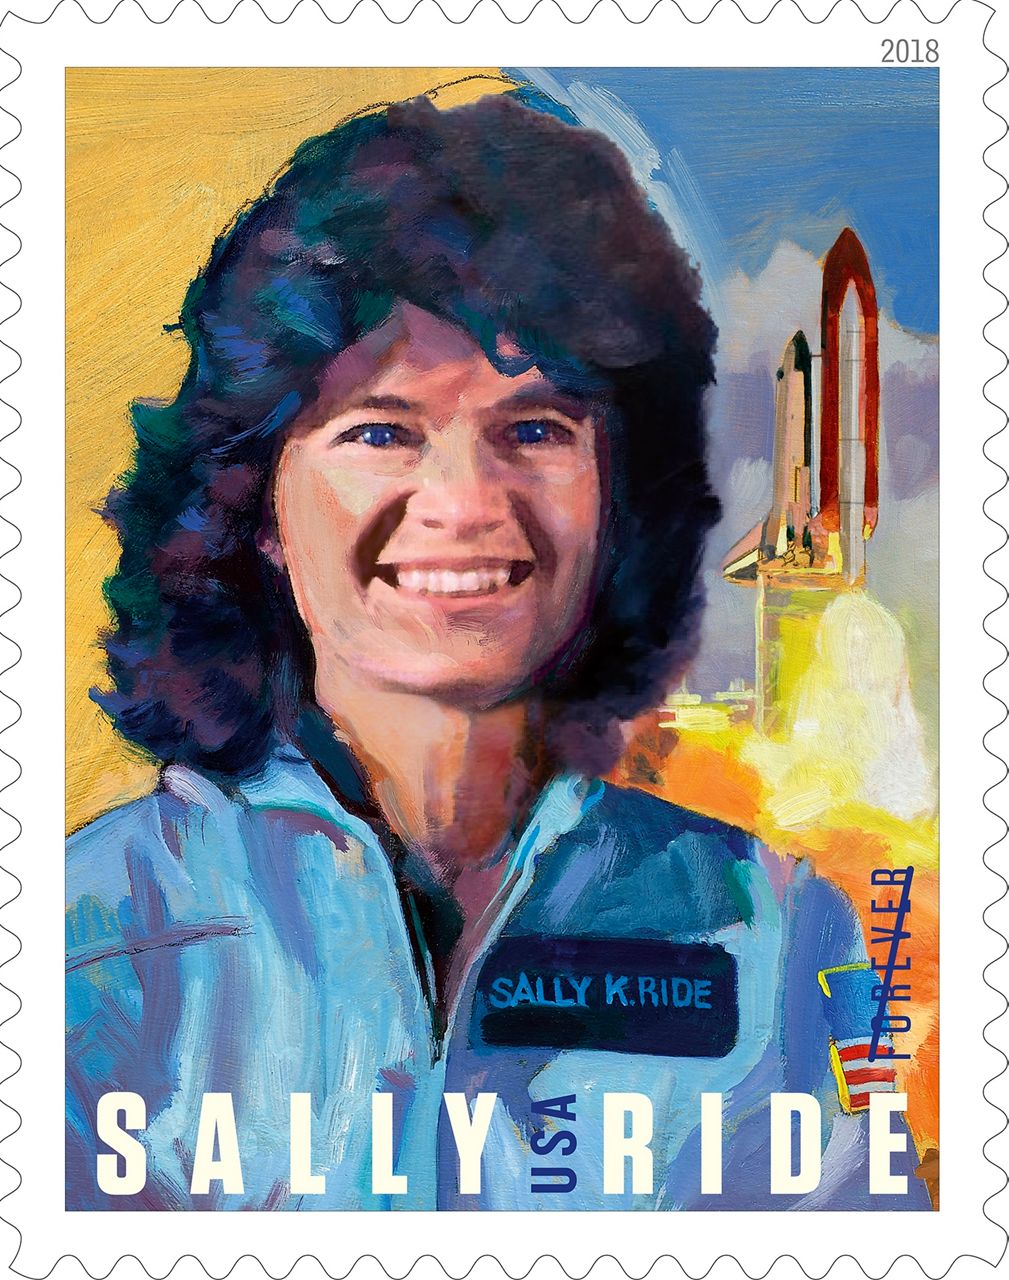 Sally Ride on Forever stamp issued by the United States Postal Service in 2018.